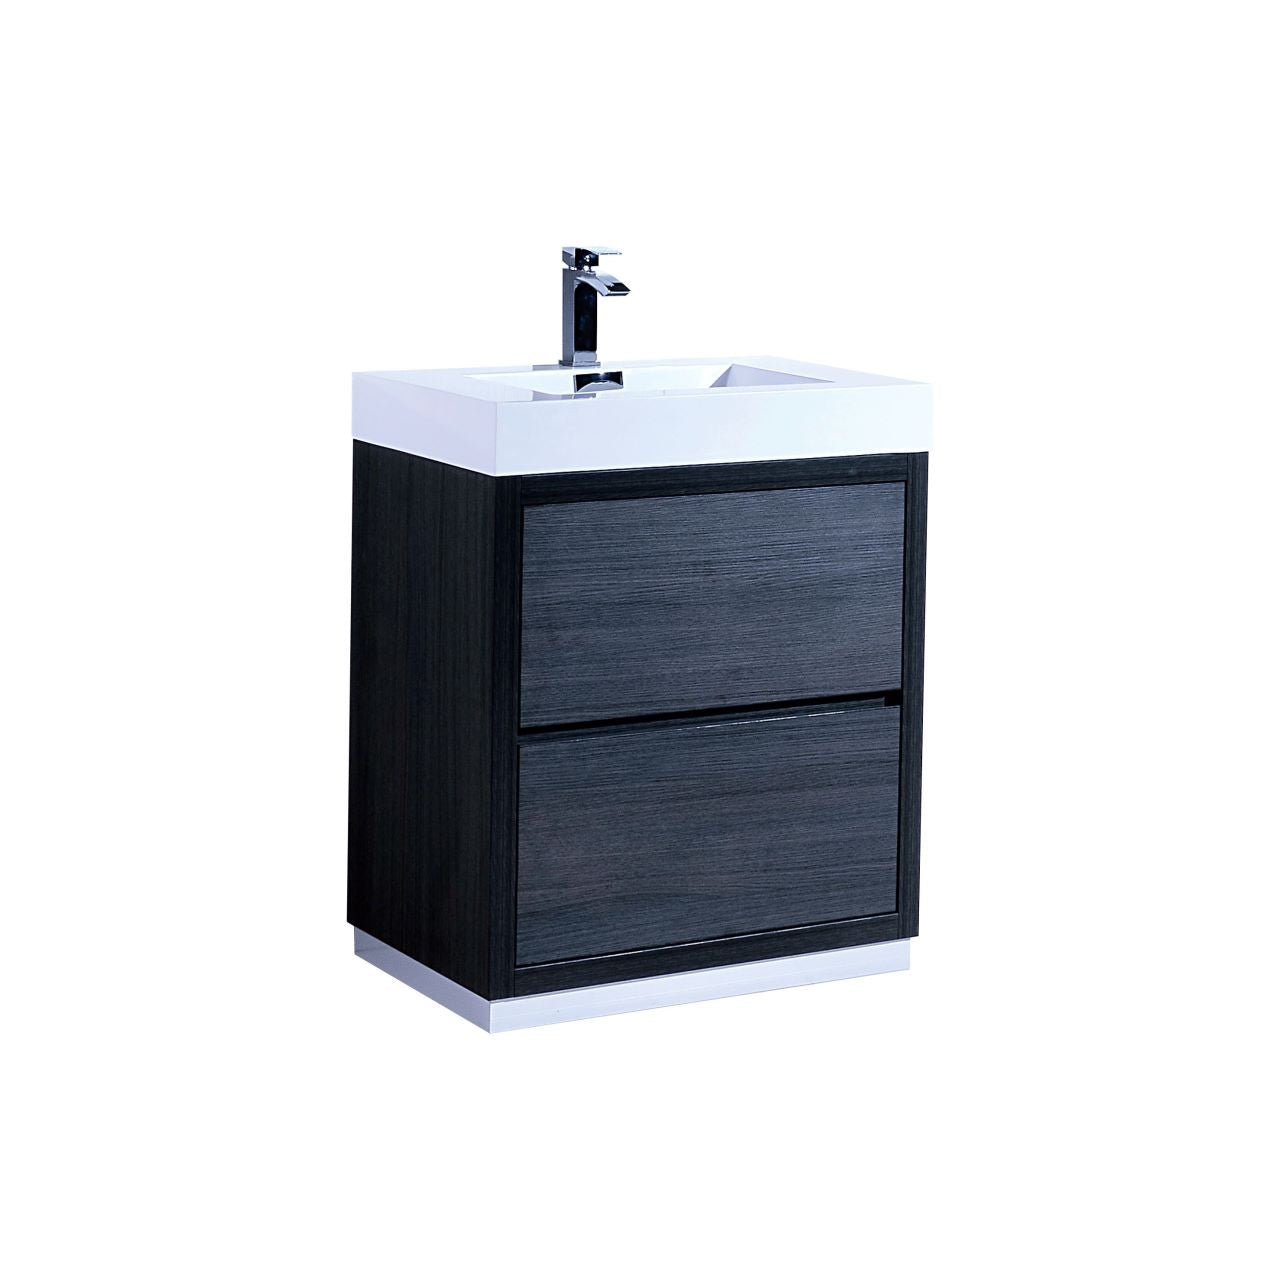 KUBEBATH Bliss FMB30-GO 30" Single Bathroom Vanity in Gray Oak with White Acrylic Composite, Integrated Sin, Angled View